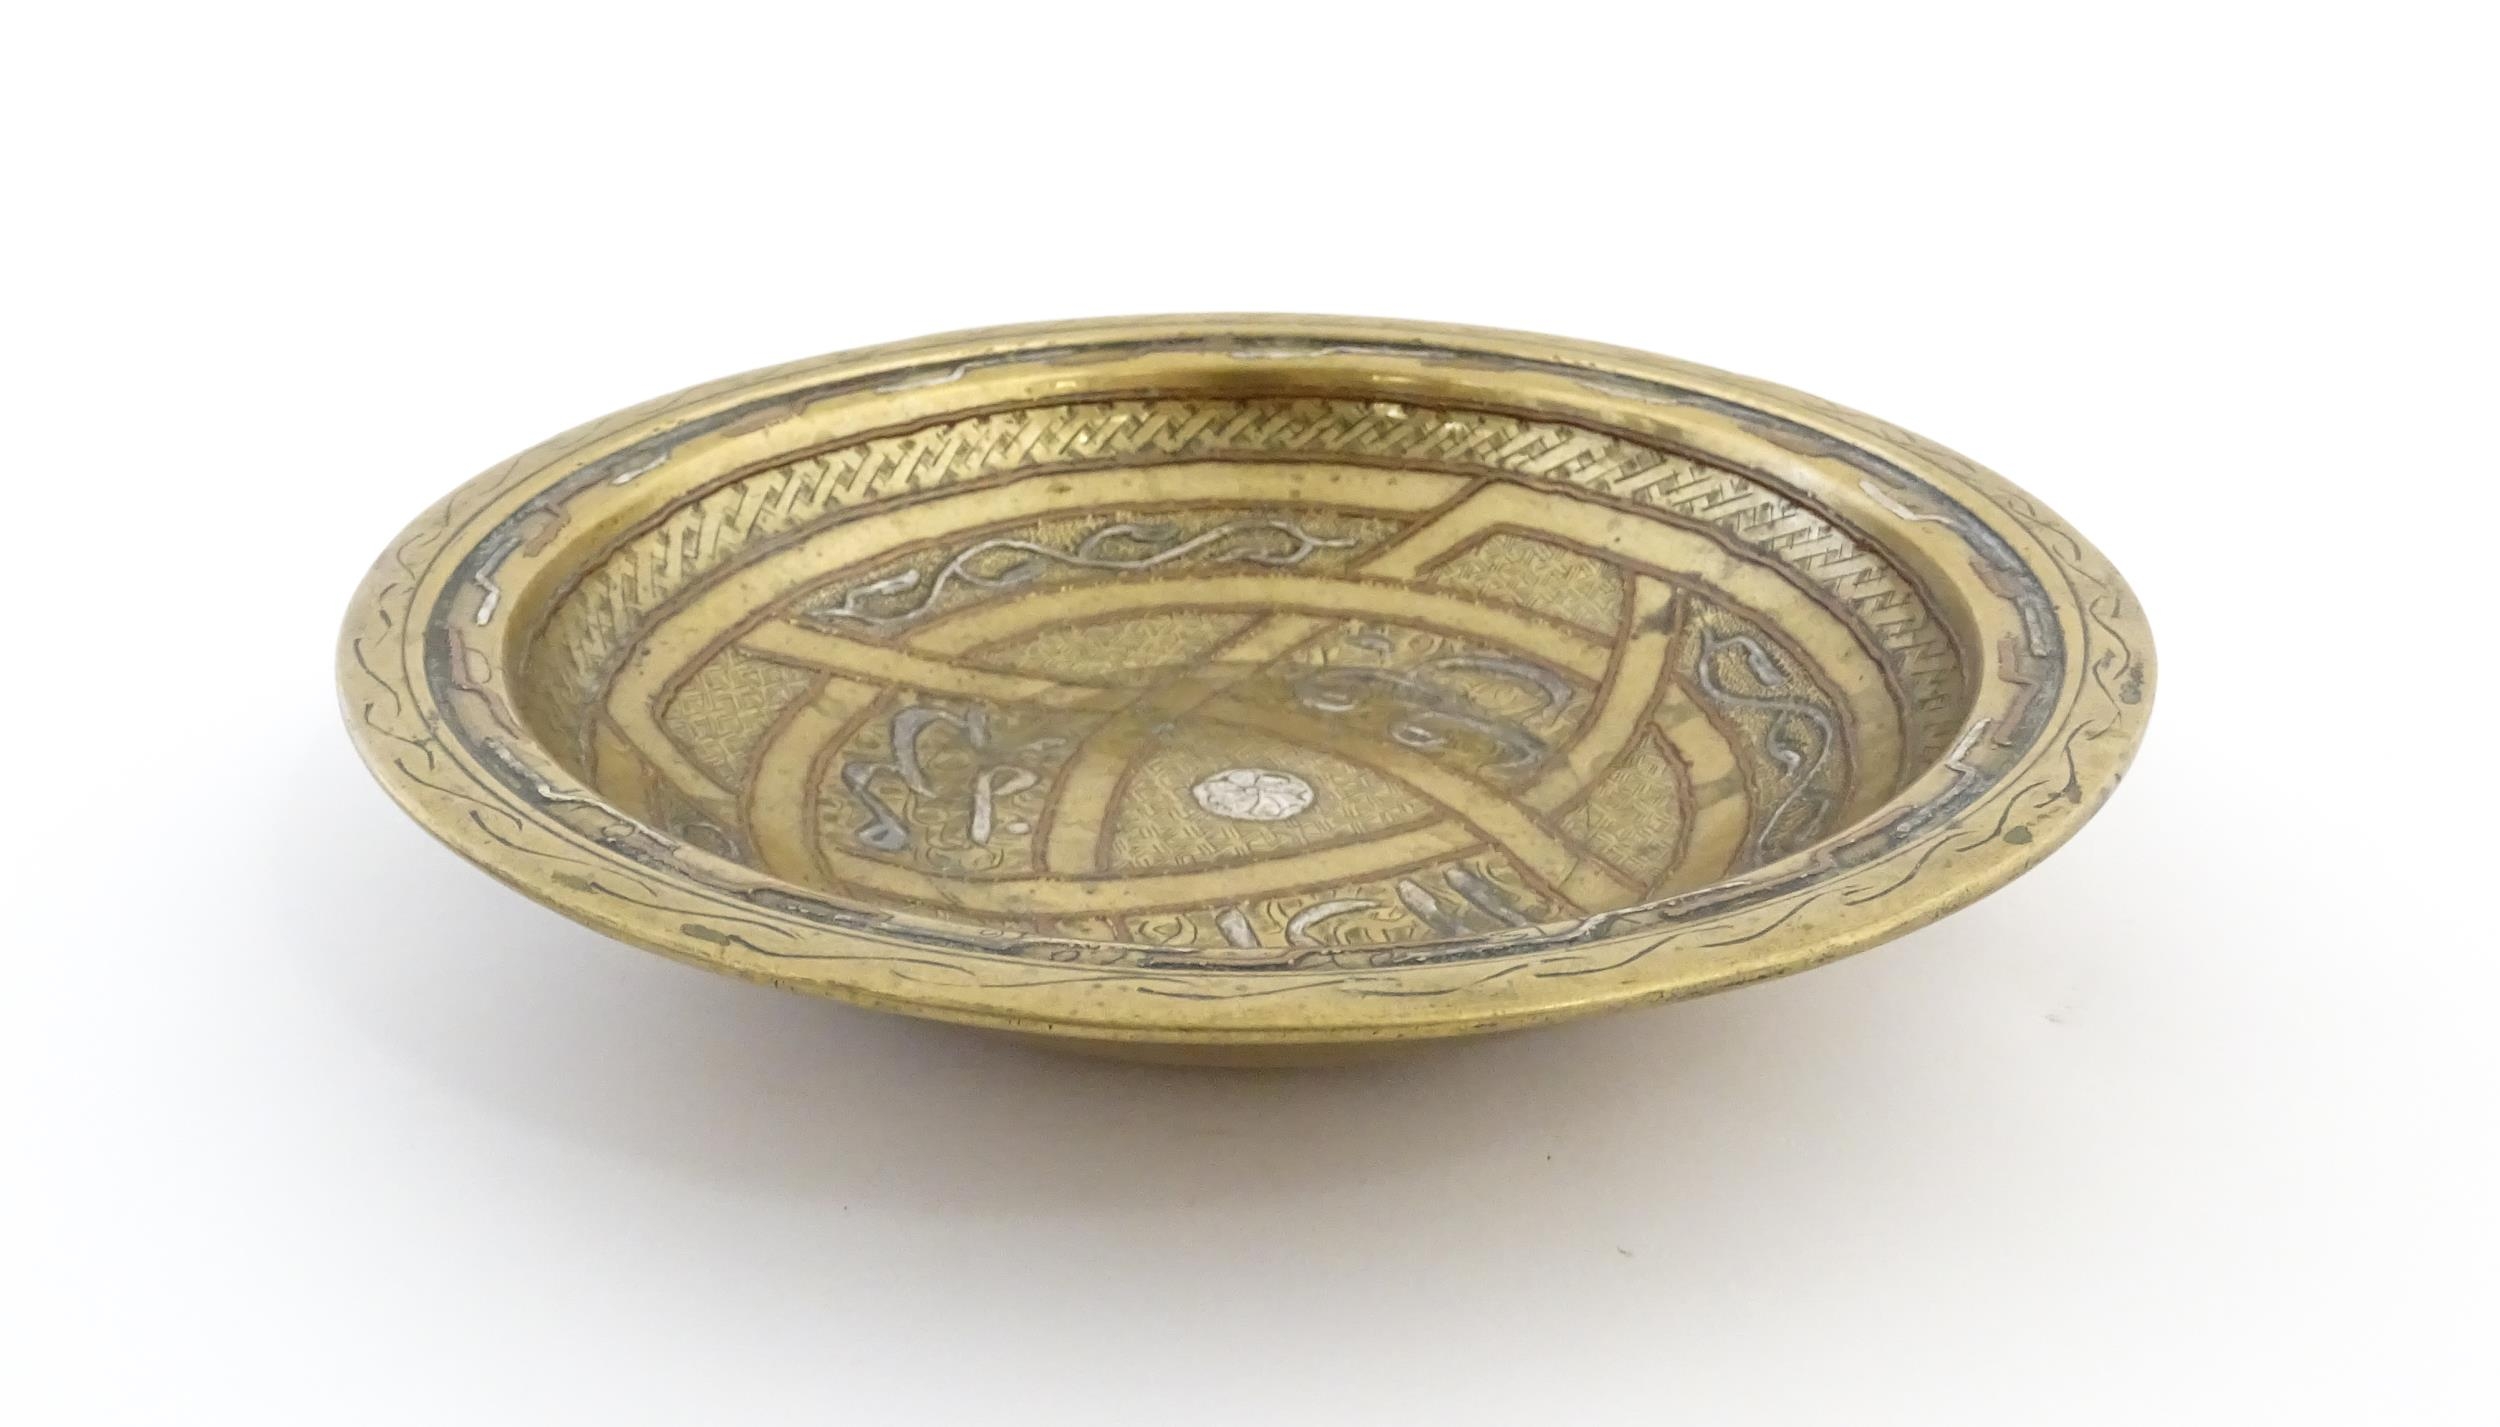 A Middle Eastern brass dish / bowl with incised detail and inlaid white metal and copper - Image 3 of 8